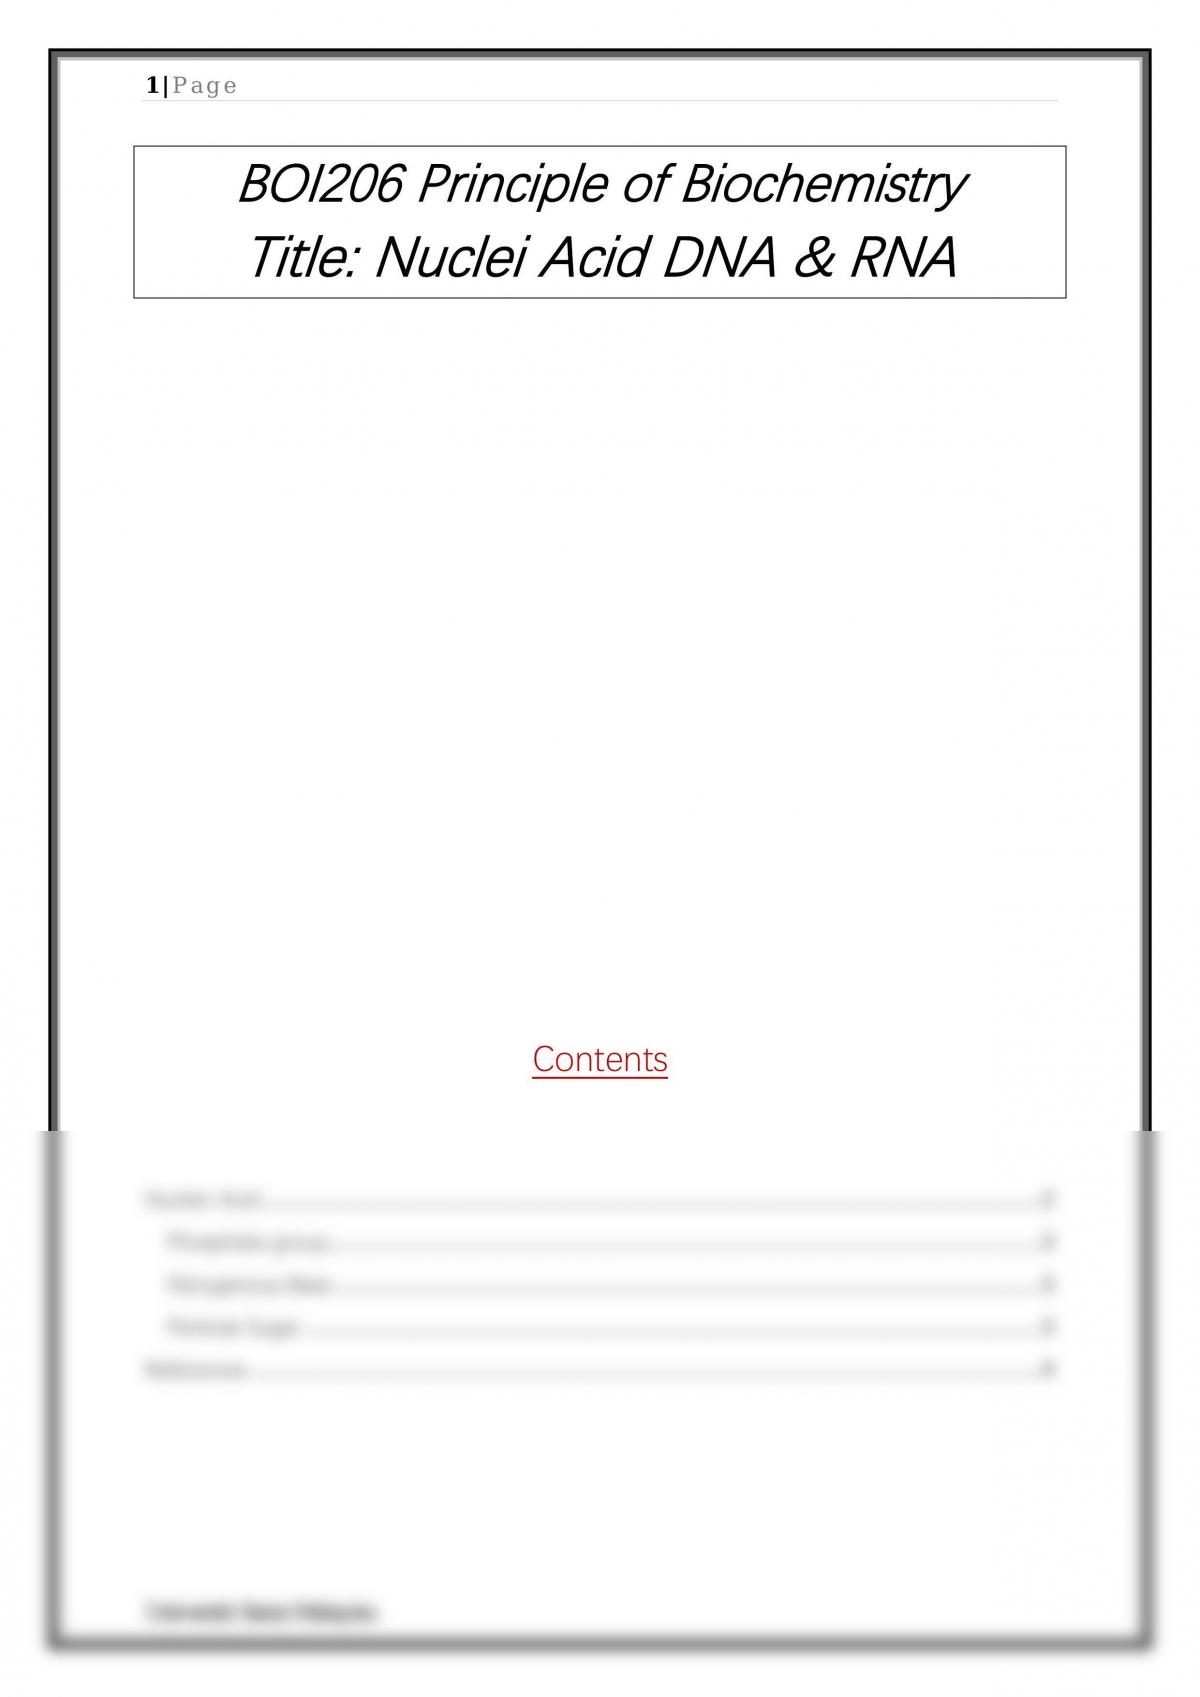 Nucleic Acid, DNA and RNA - Page 1